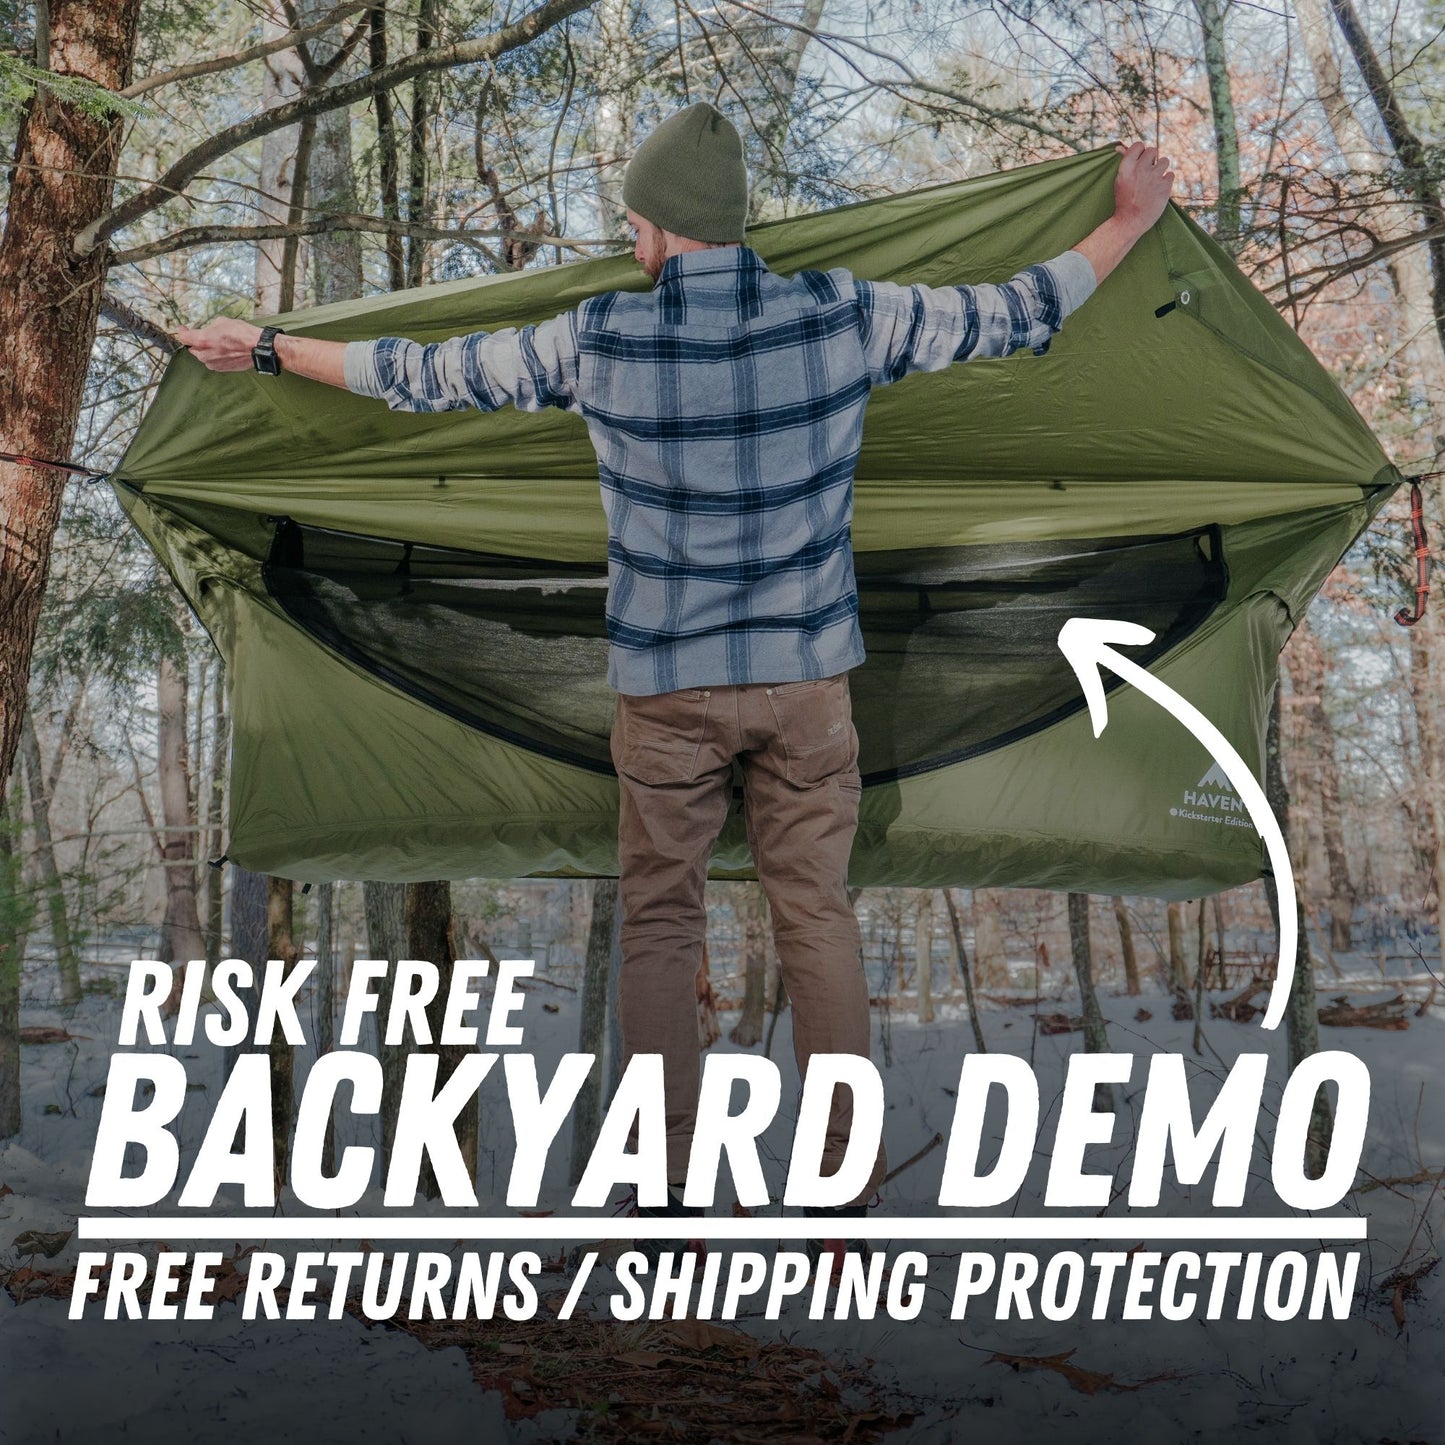 Try Risk Free - Free Returns and Shipping Protection